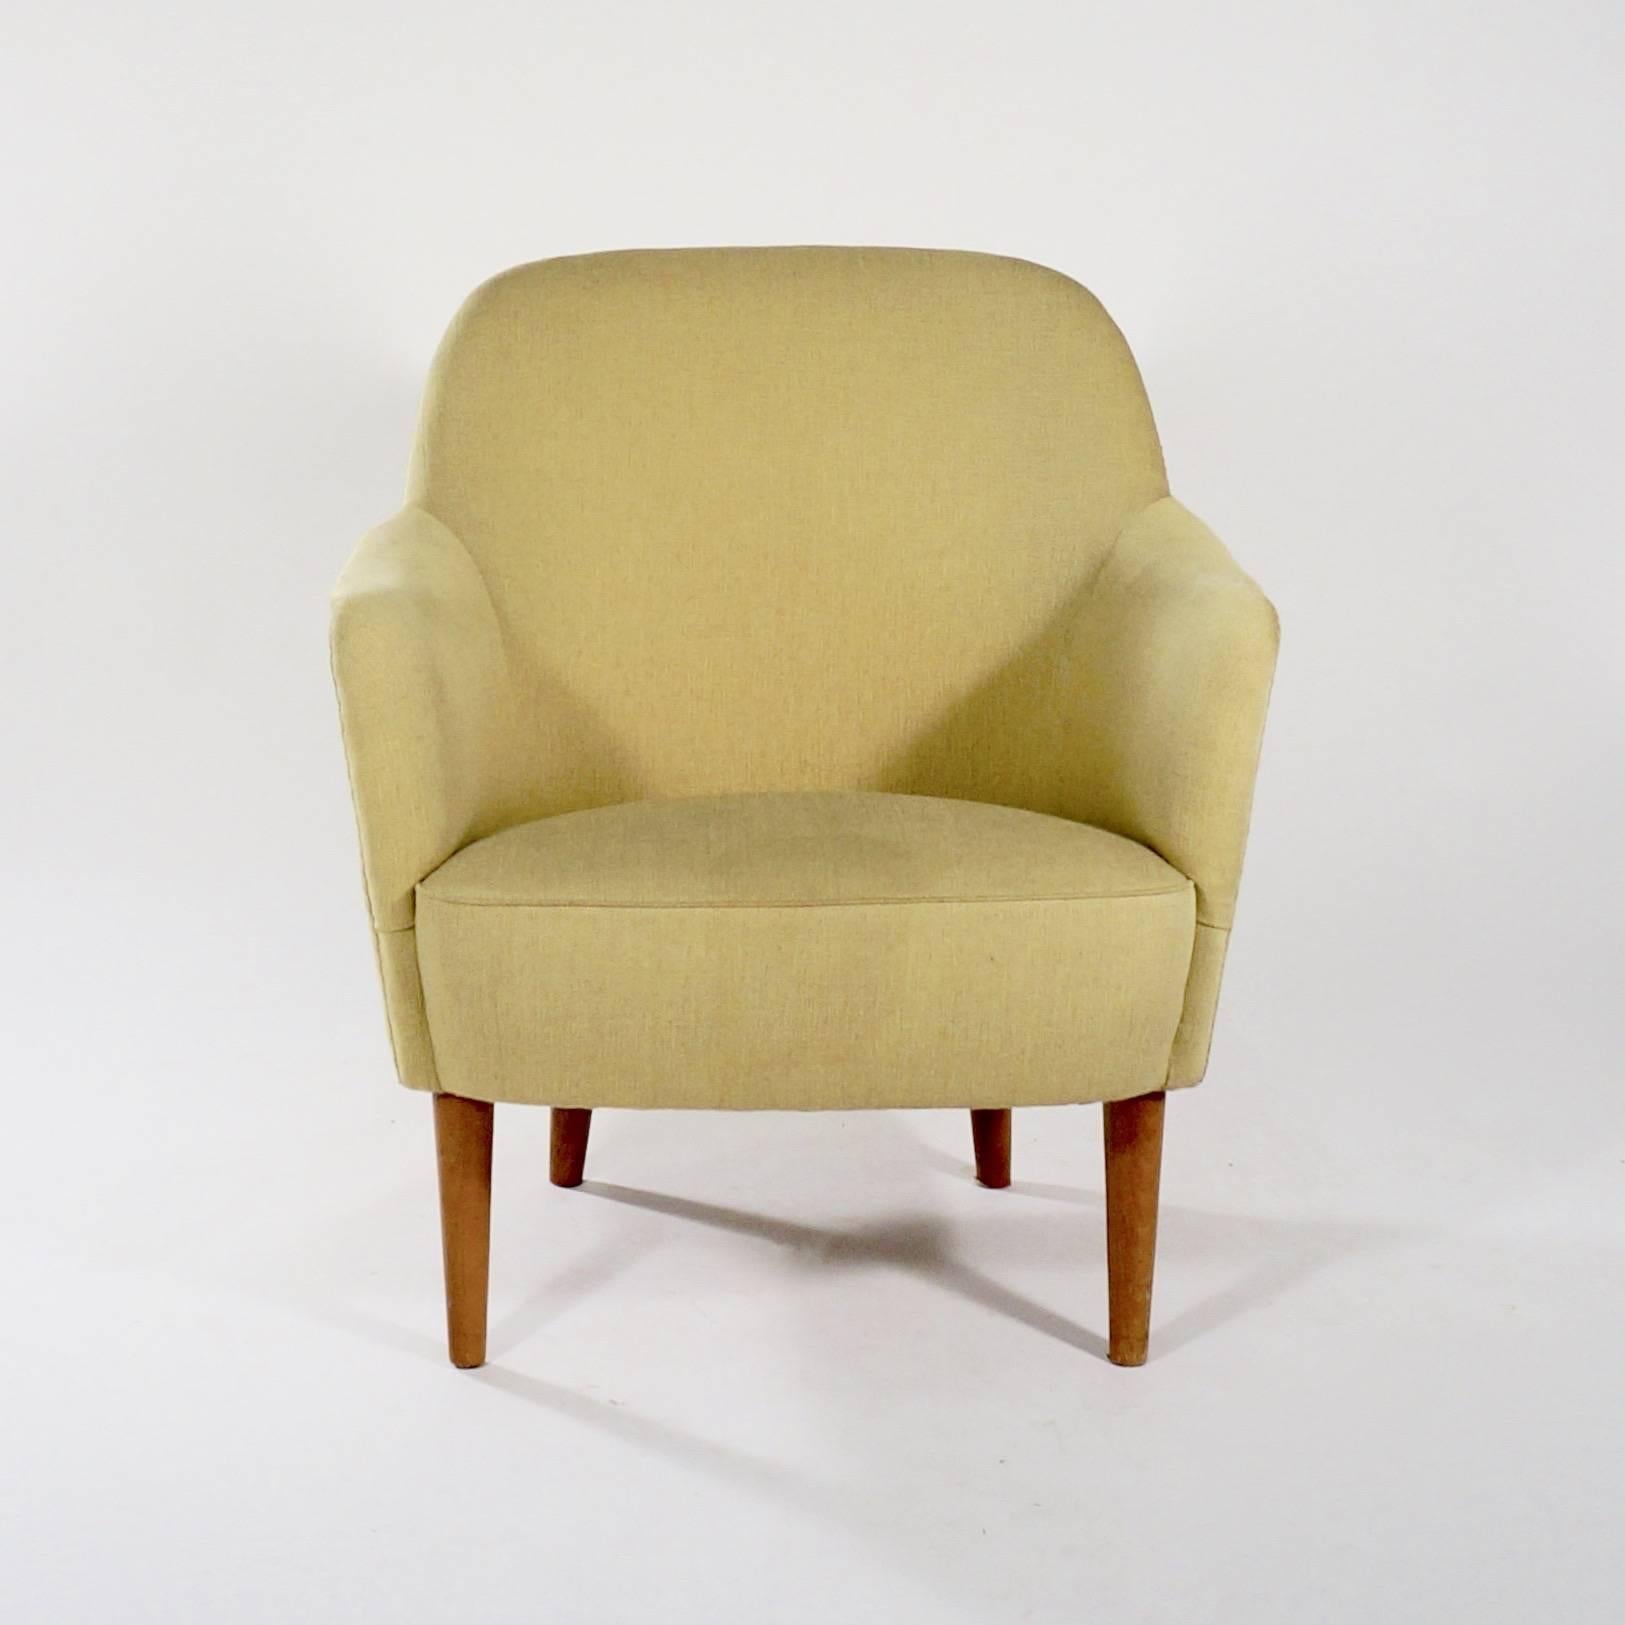 An upholstered 'Sampsel' chair with stained beech legs, a curved back and roll-over arms,

Sweden, circa 1950s.

One of Sweden's leading 20th century furniture designers, Malmsten's chairs demonstrate Scandinavian design at its best.